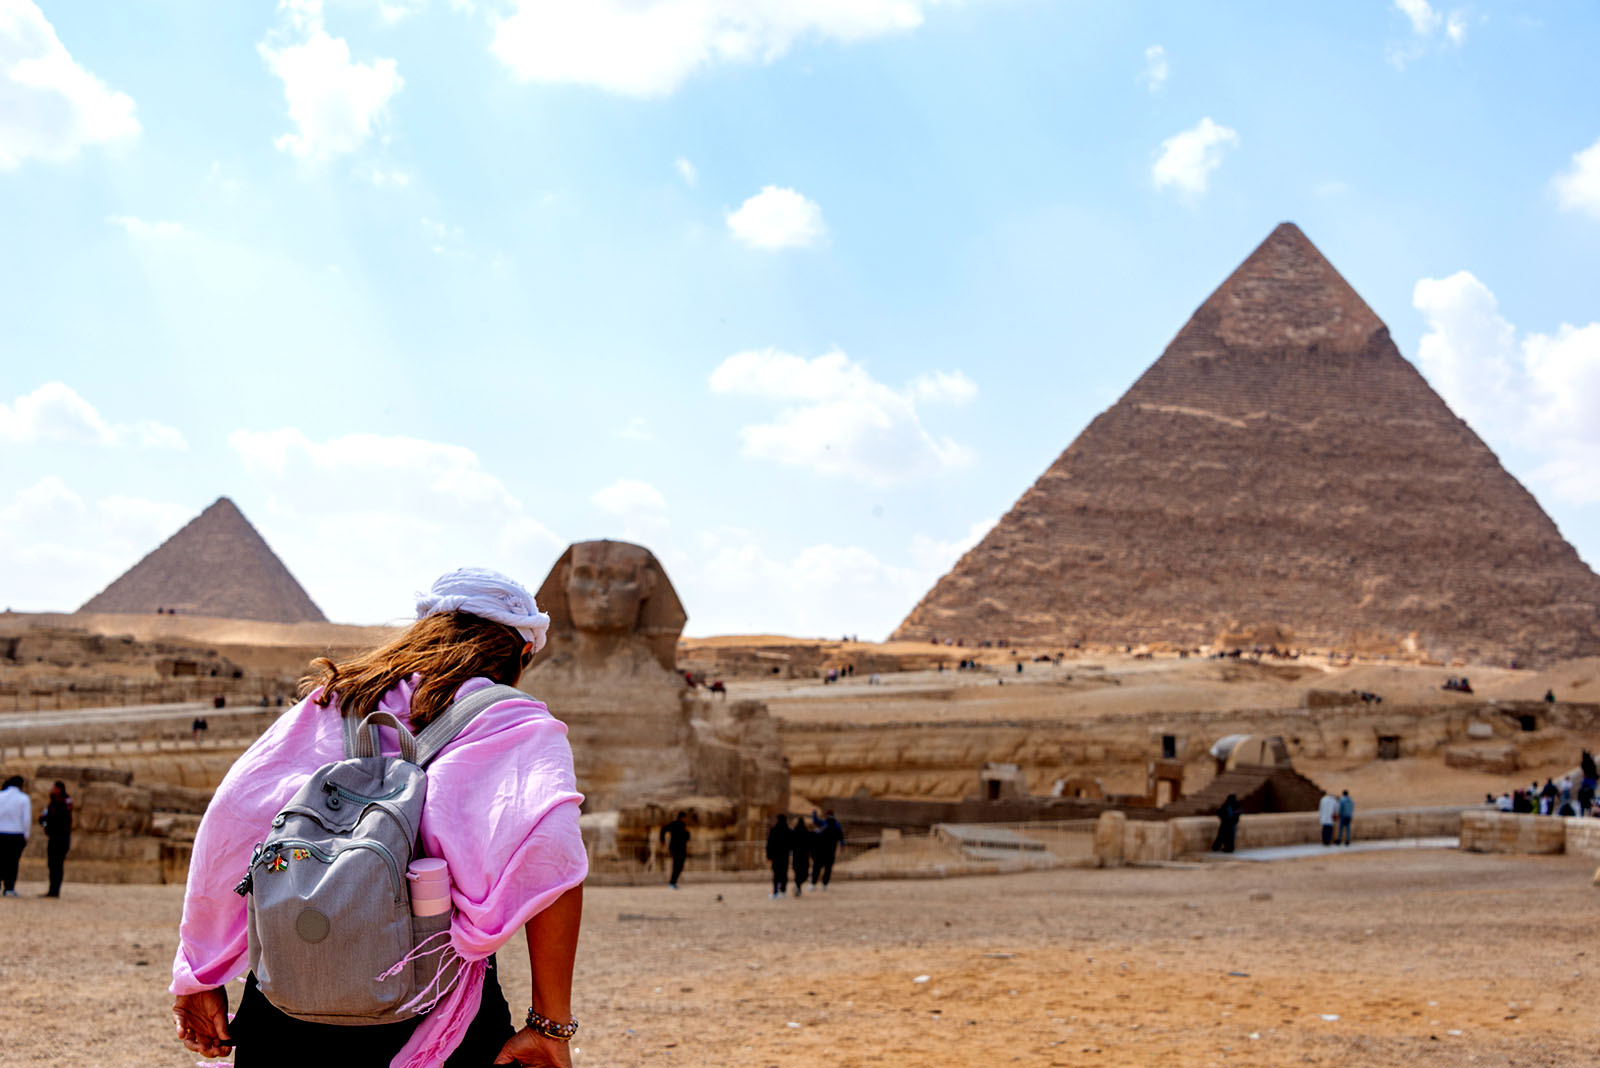 A nice tour in Giza-Egypt for two days